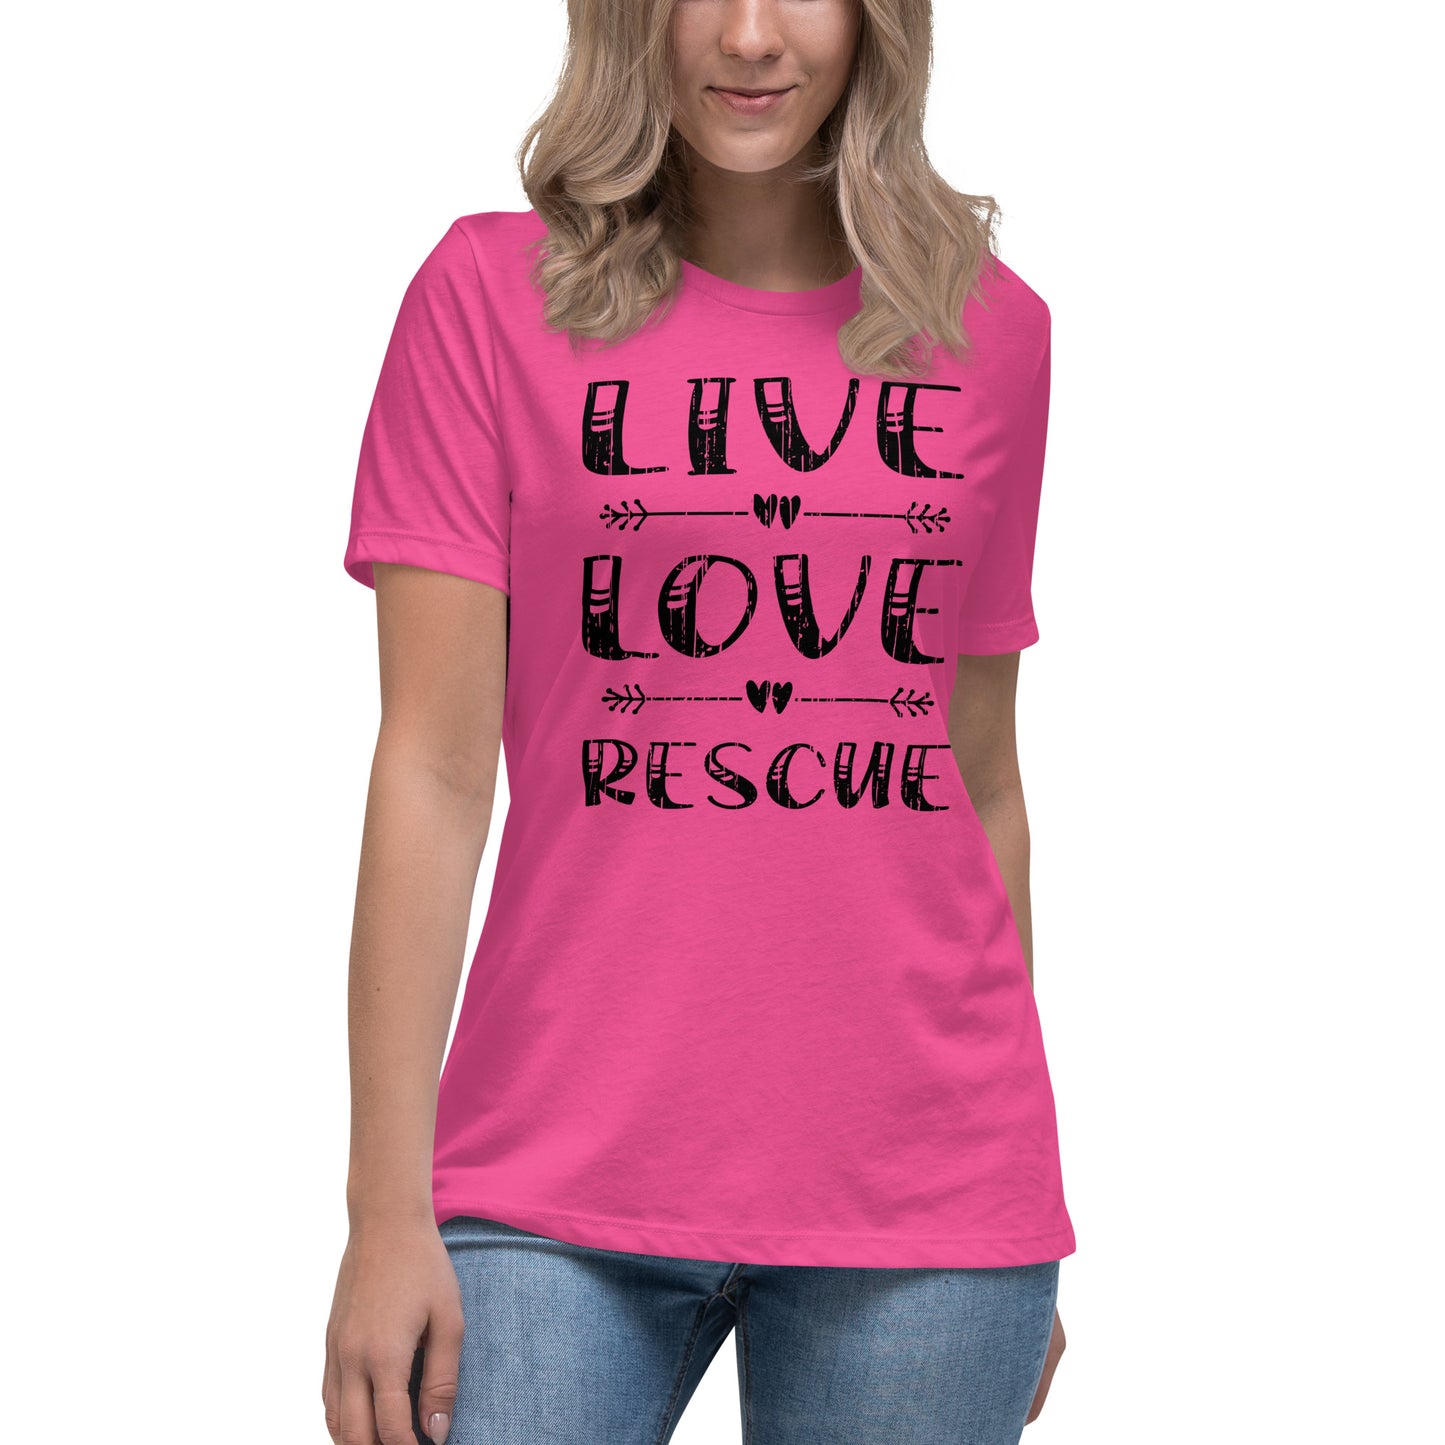 Live love rescue women’s relaxed fit t-shirts by Dog Artistry berry color